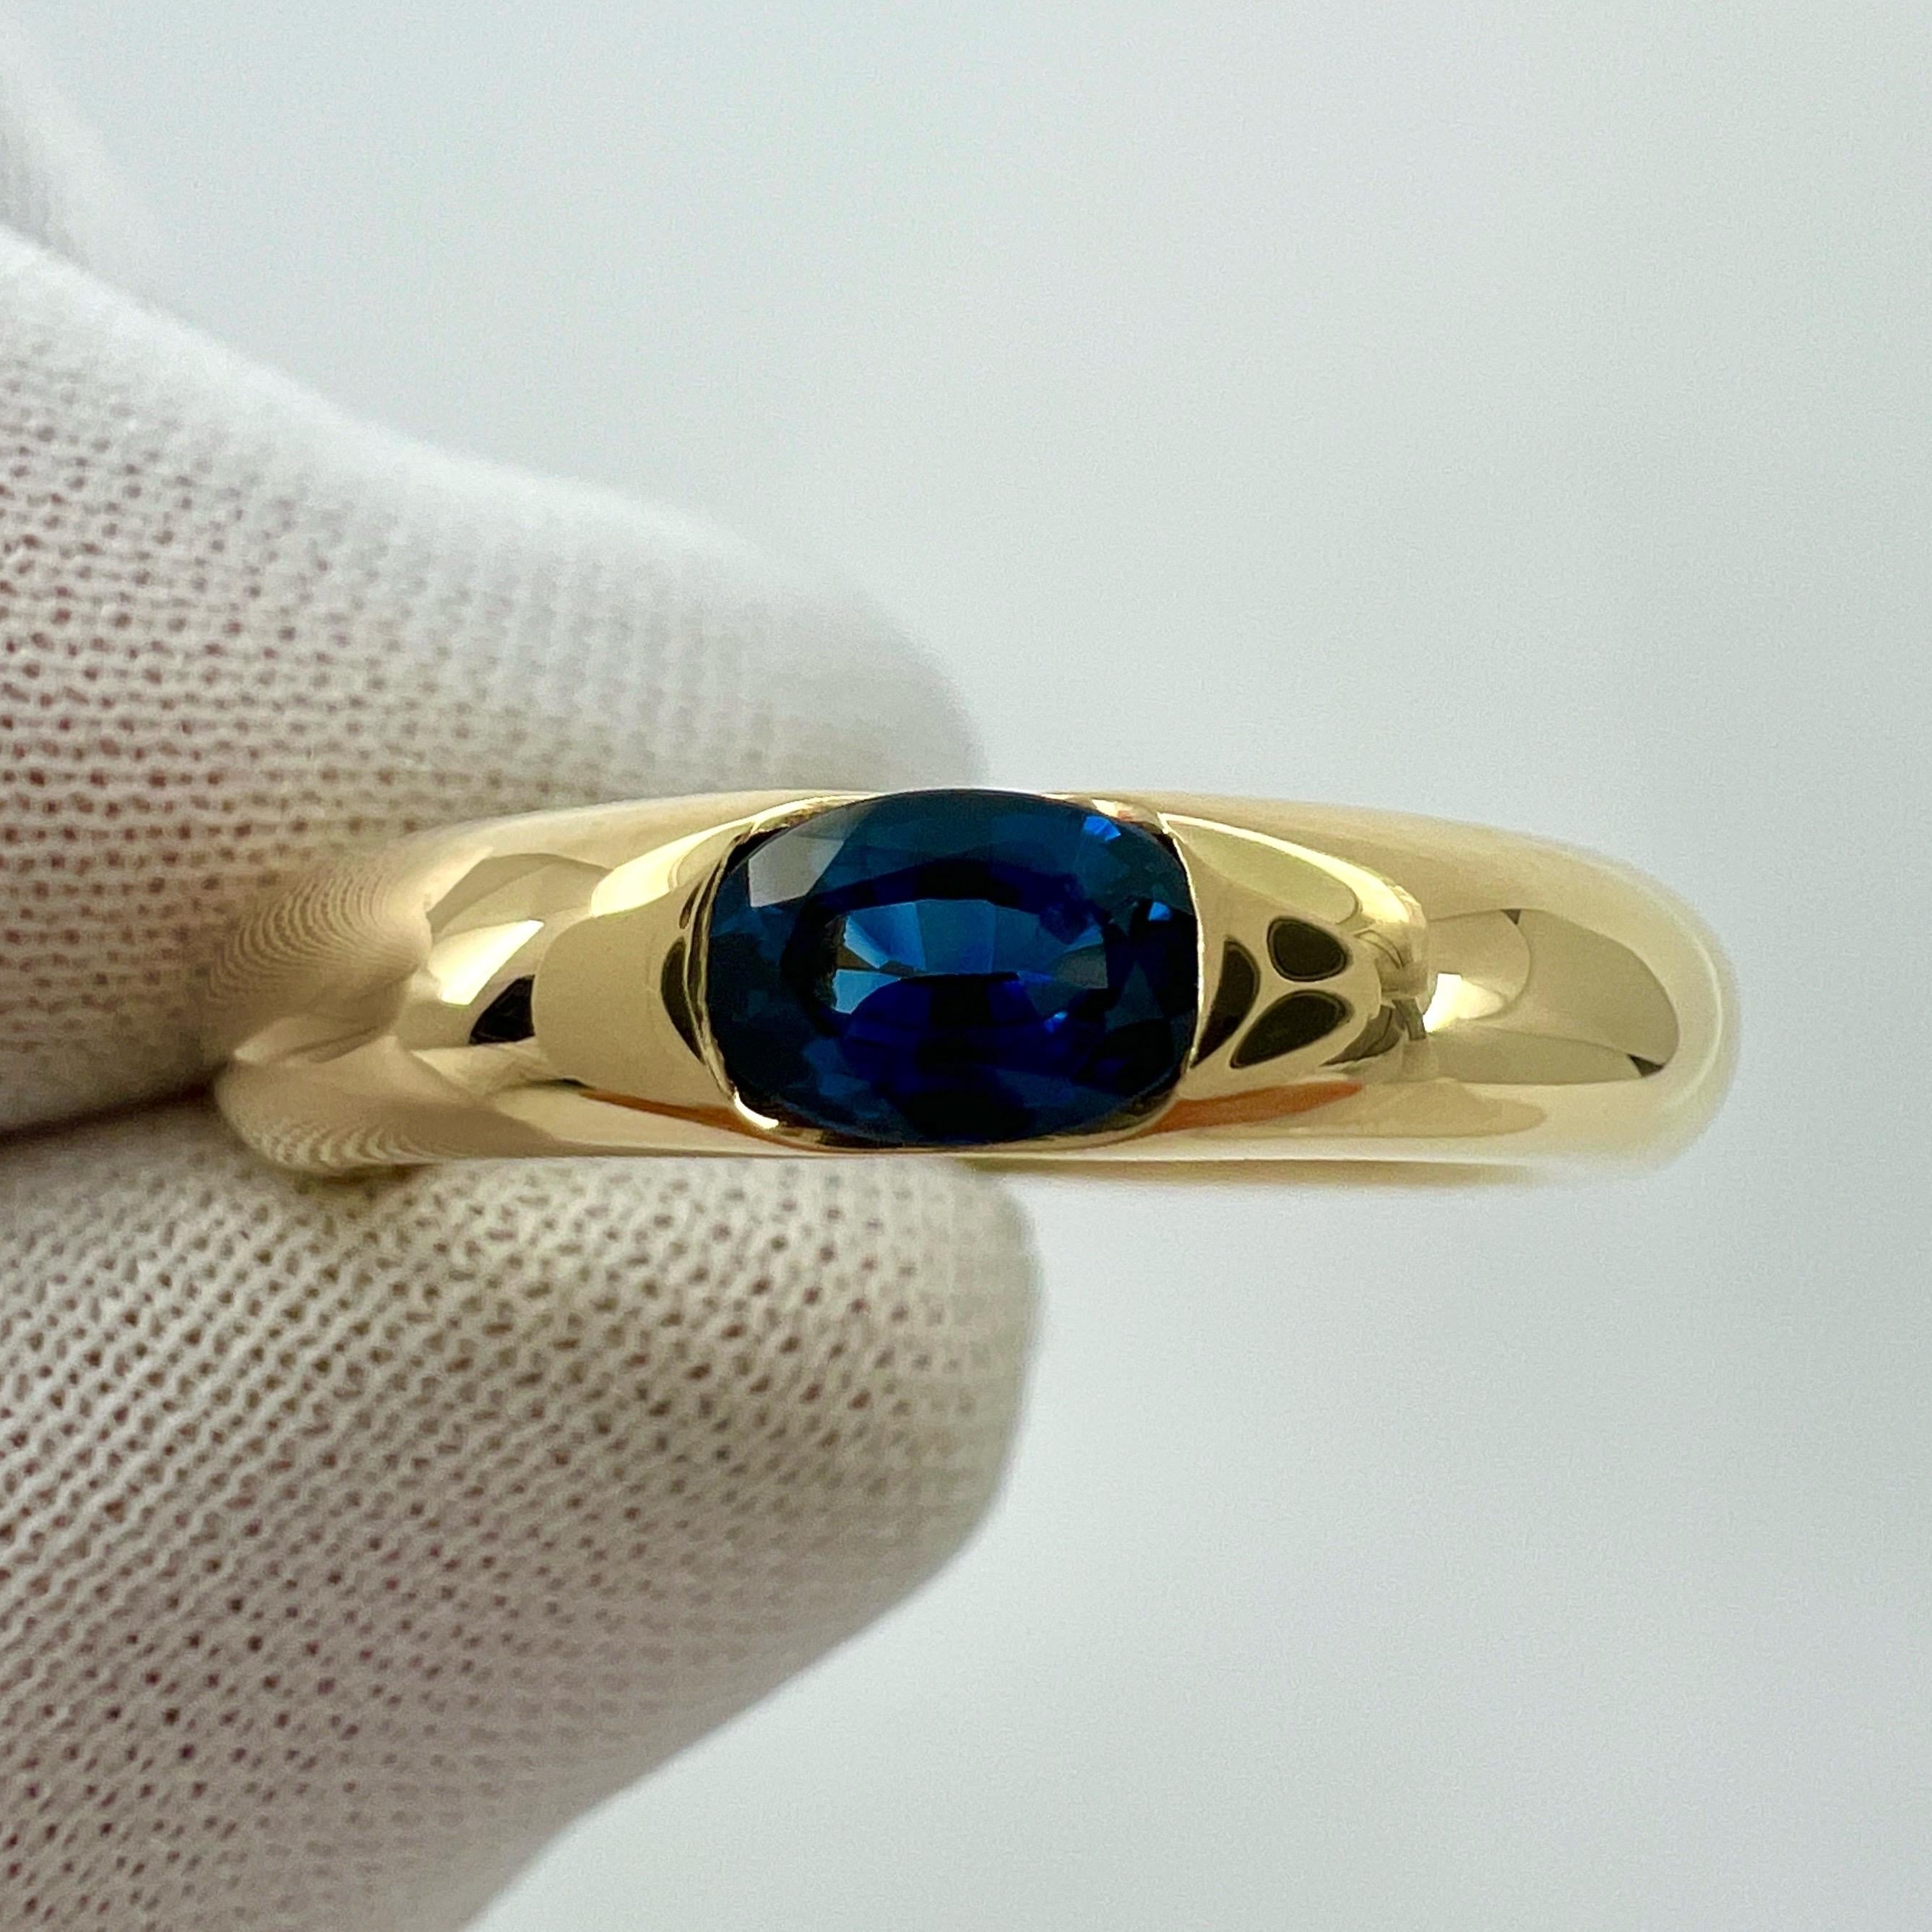 Vintage Cartier Blue Sapphire Oval Ellipse 18k Yellow Gold Solitaire Ring US5 49 For Sale 5